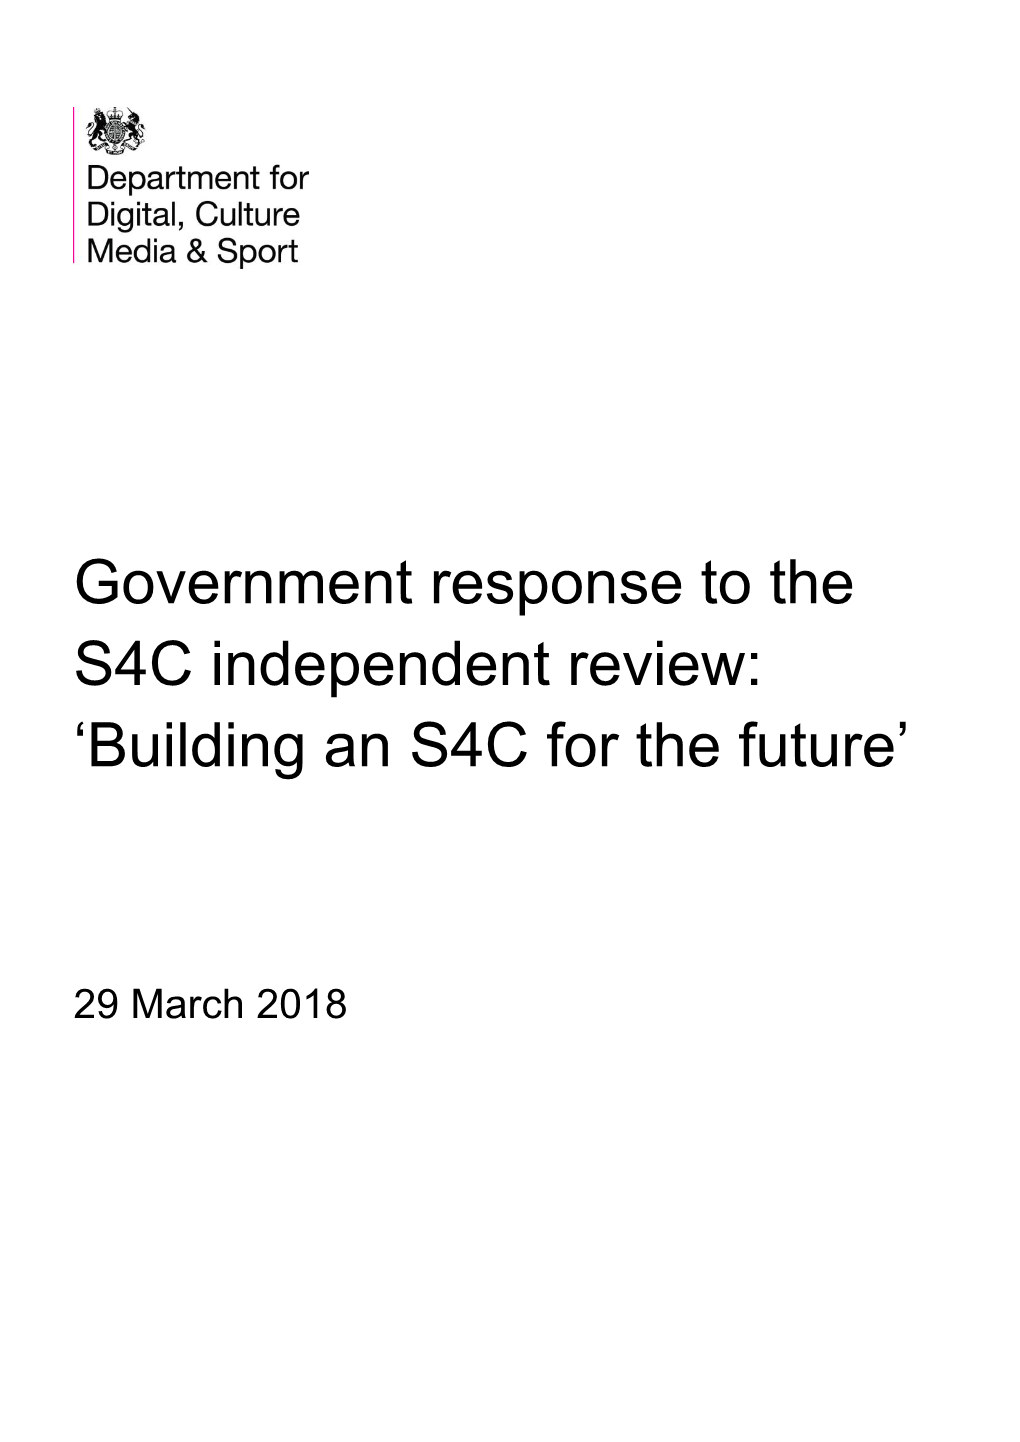 Government Response to the S4C Independent Review: ‘Building an S4C for the Future’